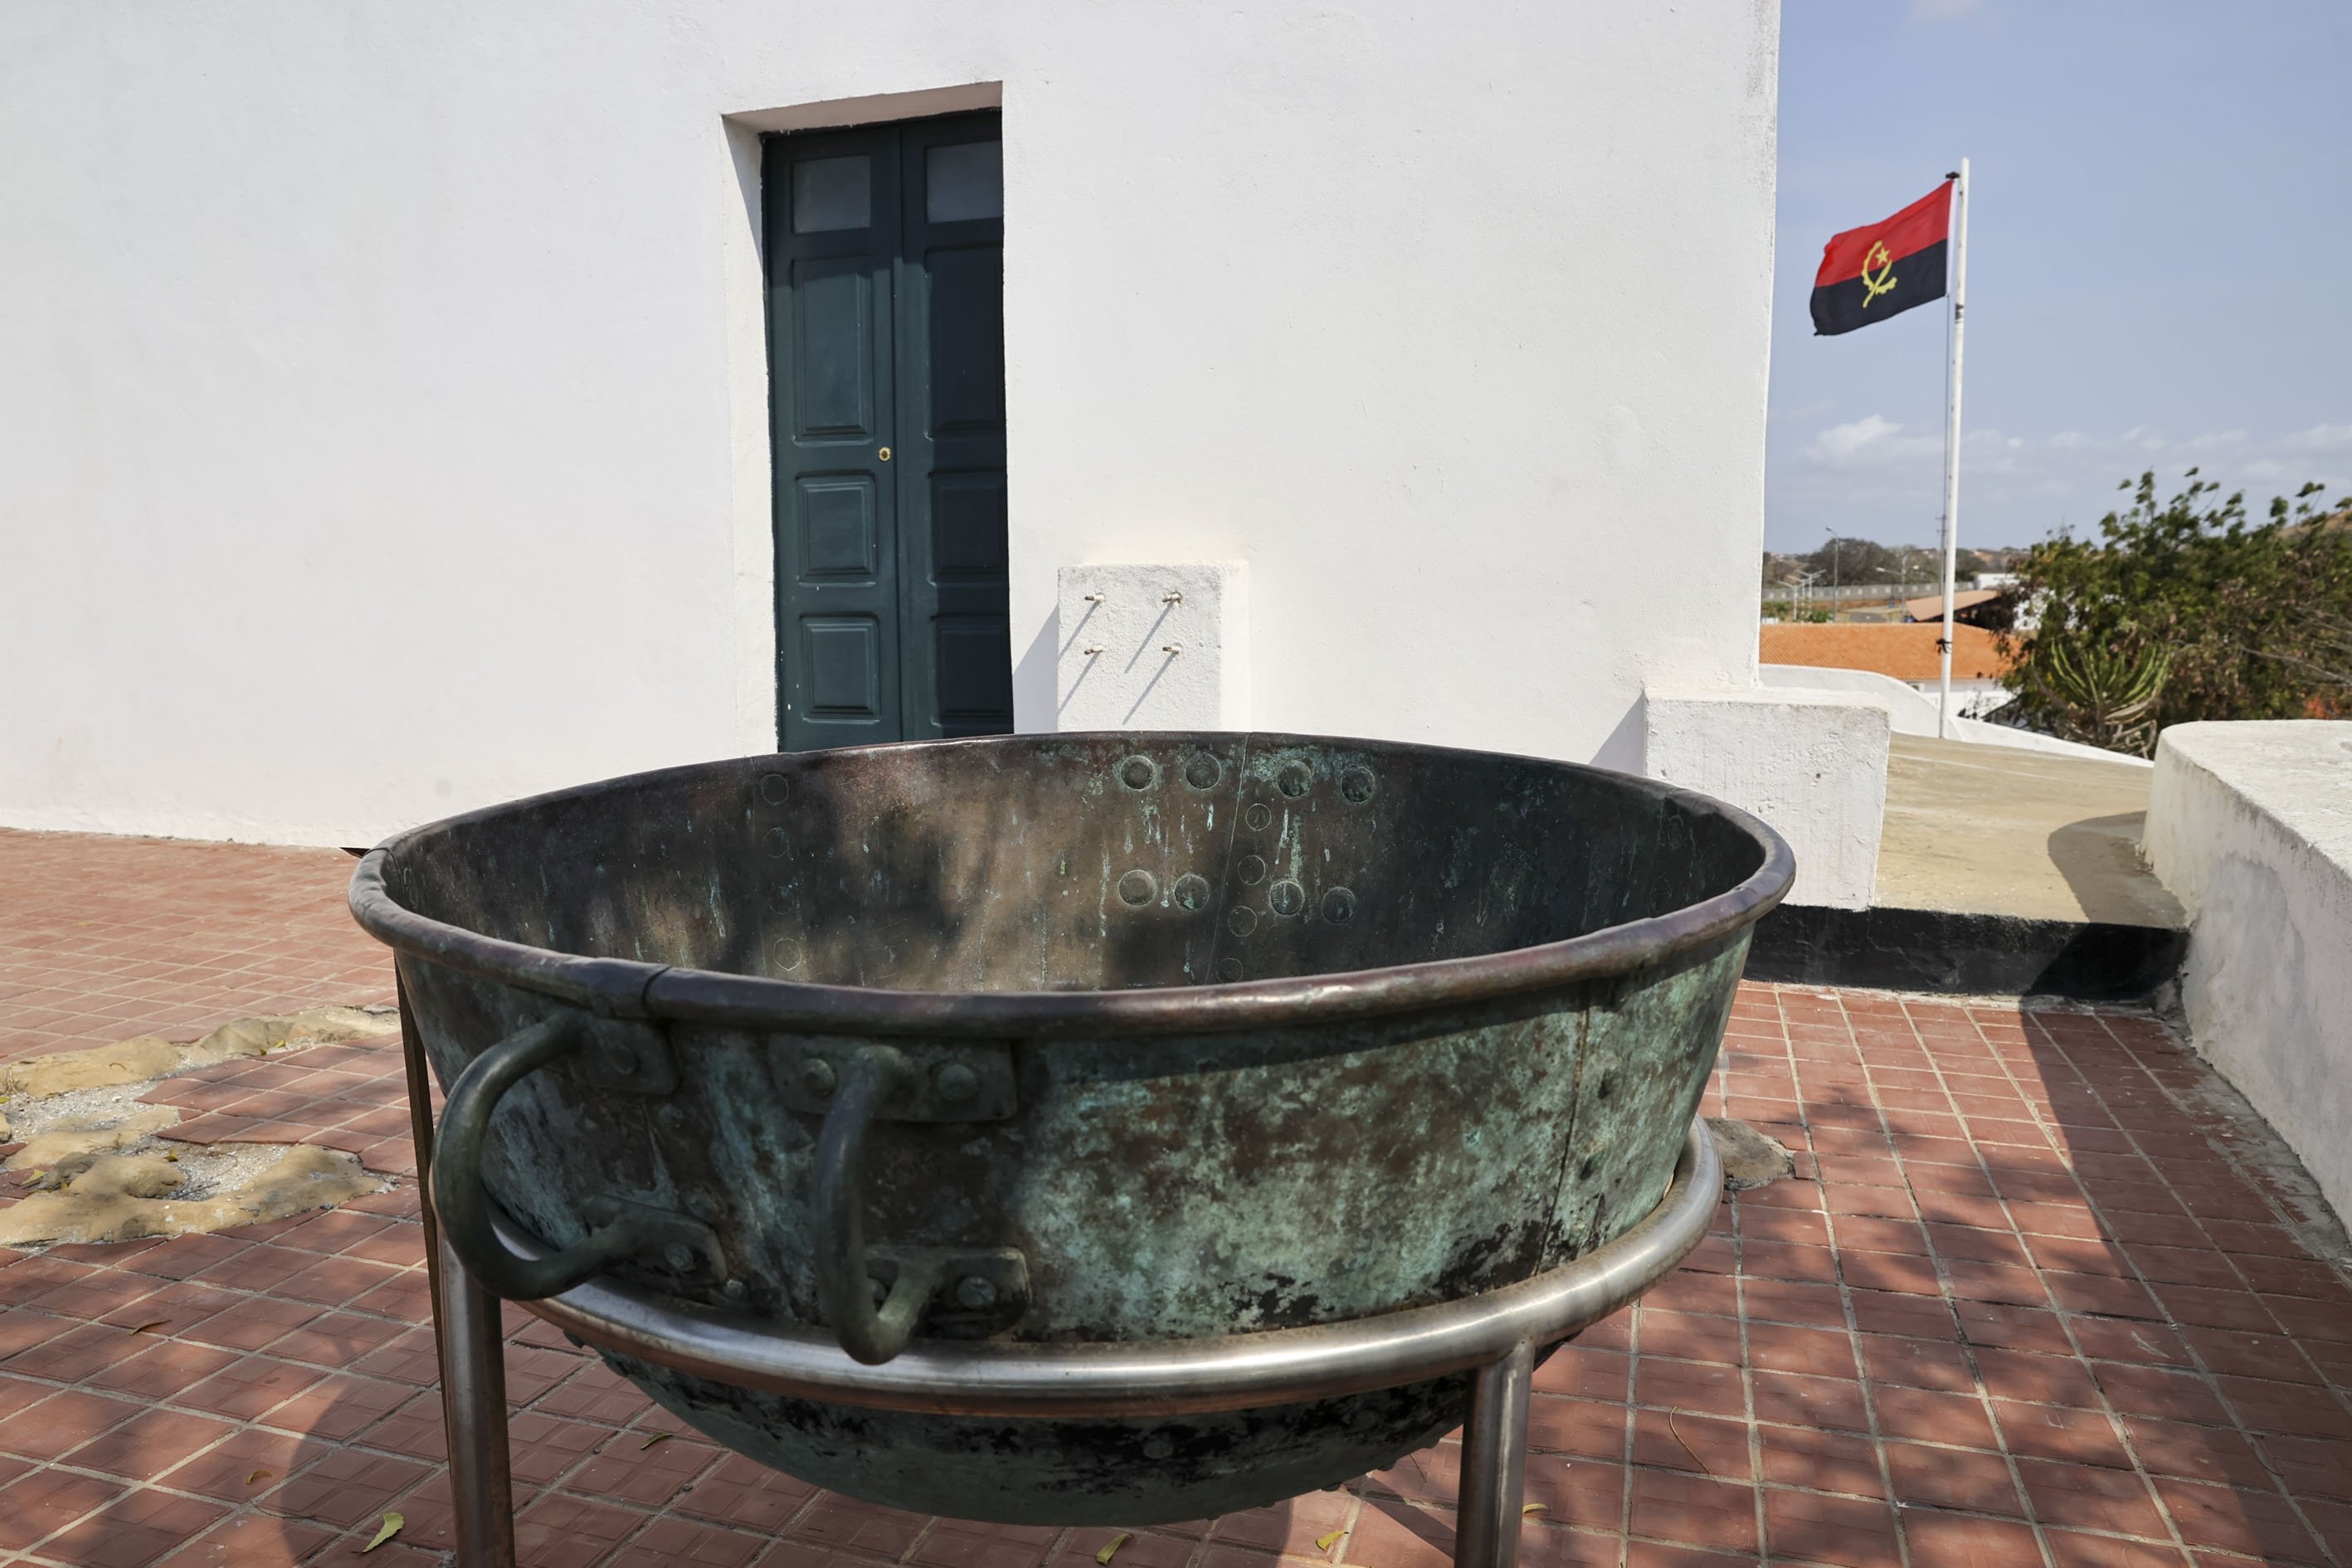 A cauldron from the 18th century in which Africans were baptized while waiting to be loaded onto ships, the National Museum of Slavery, Luanda, Angola, Oct. 20, 2021. (AA Photo)